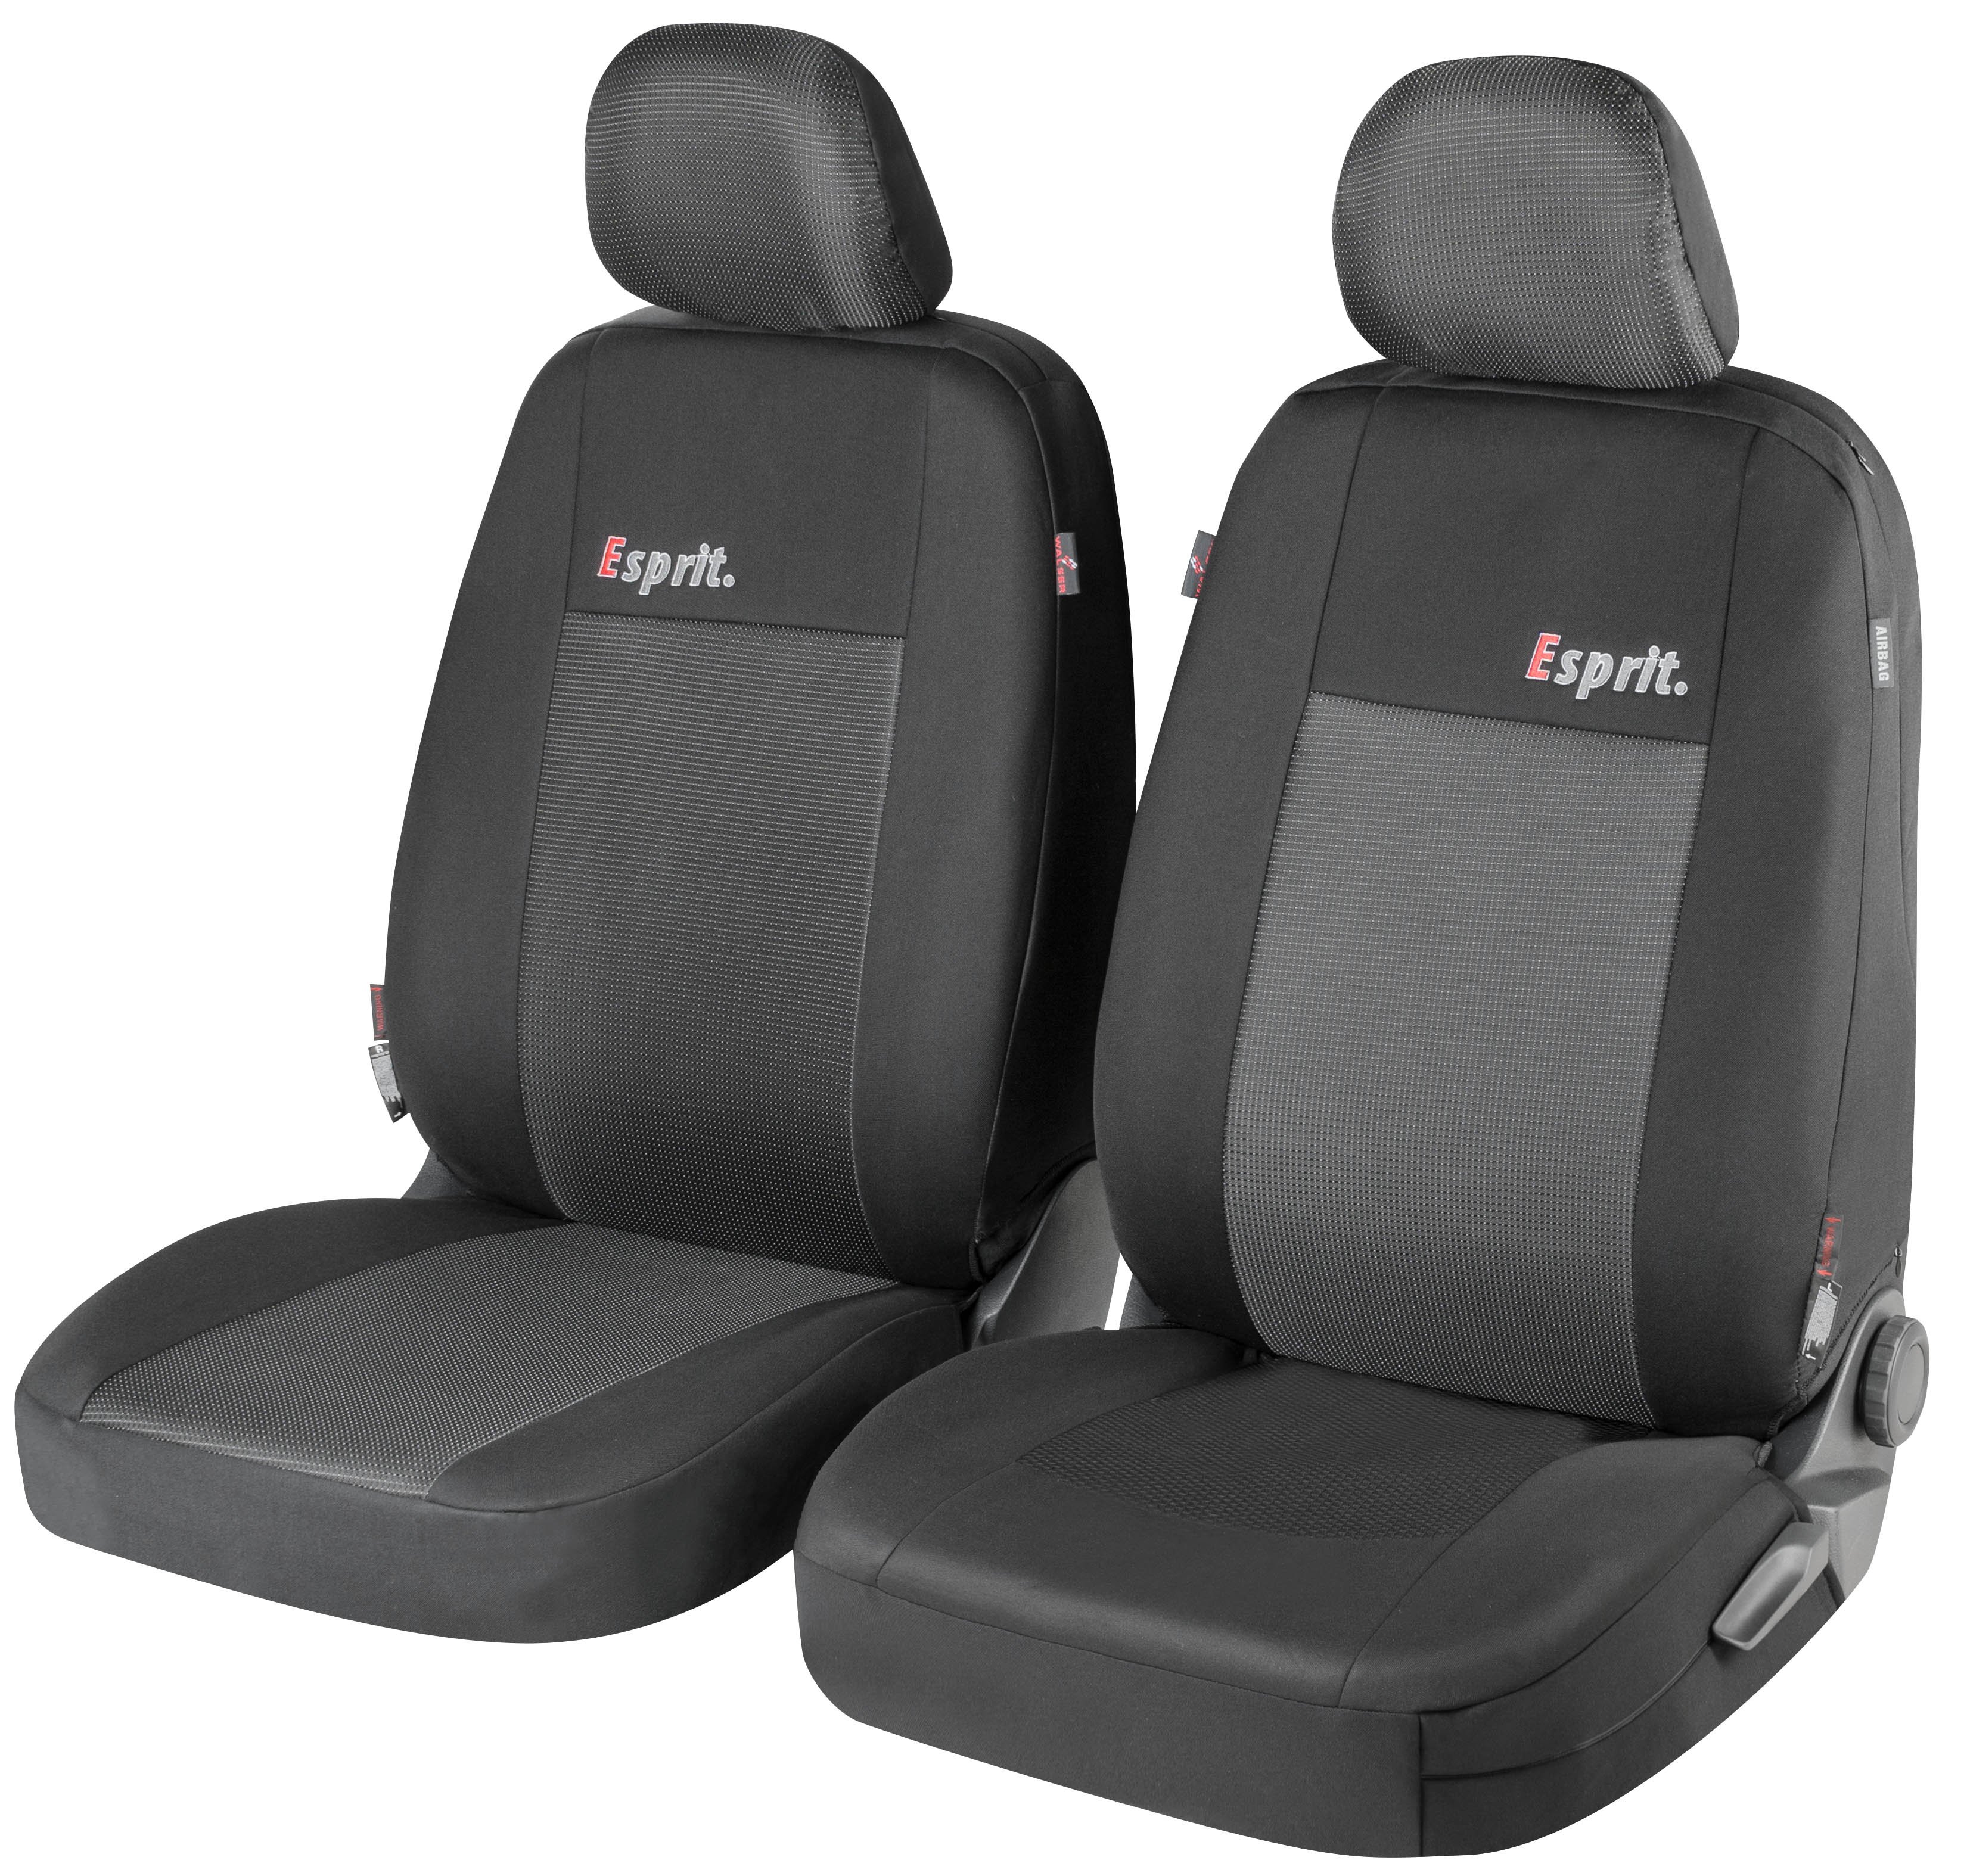 ZIPP IT Premium Esprit Car Seat Covers for 2 front Seats with zip system, normal Seats